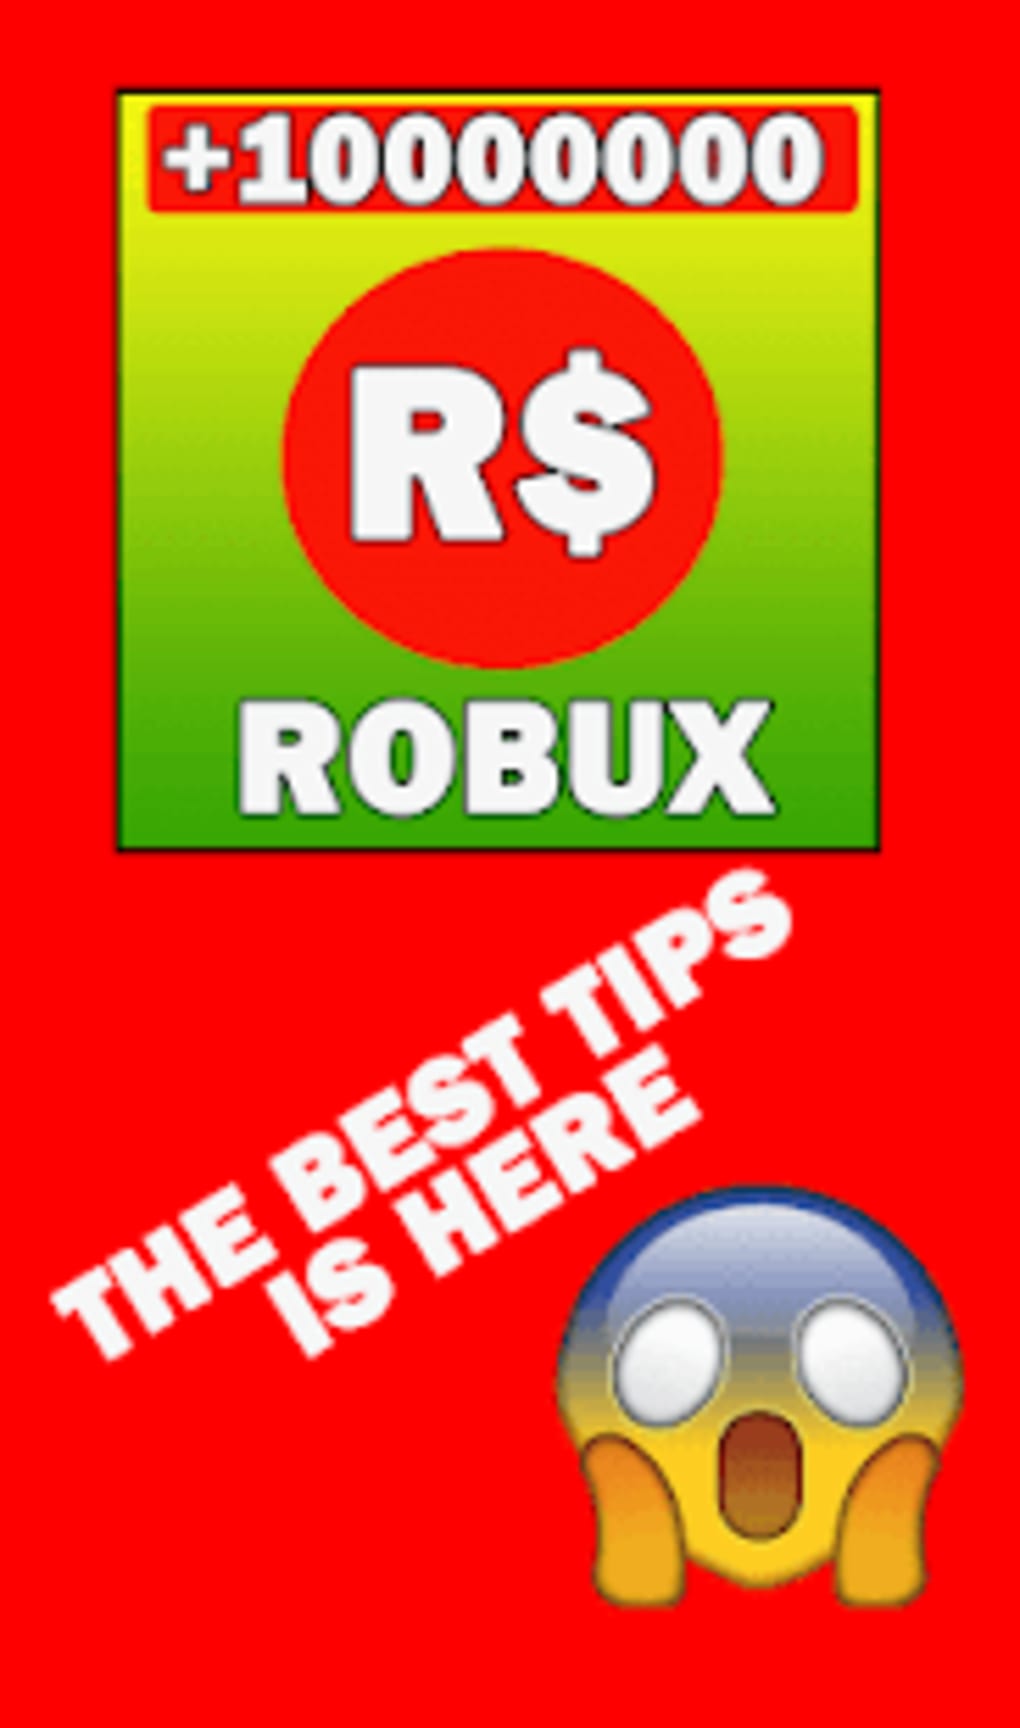 Get Free Robux Tips Get Robux Free 2k19 Para Android - robux directo